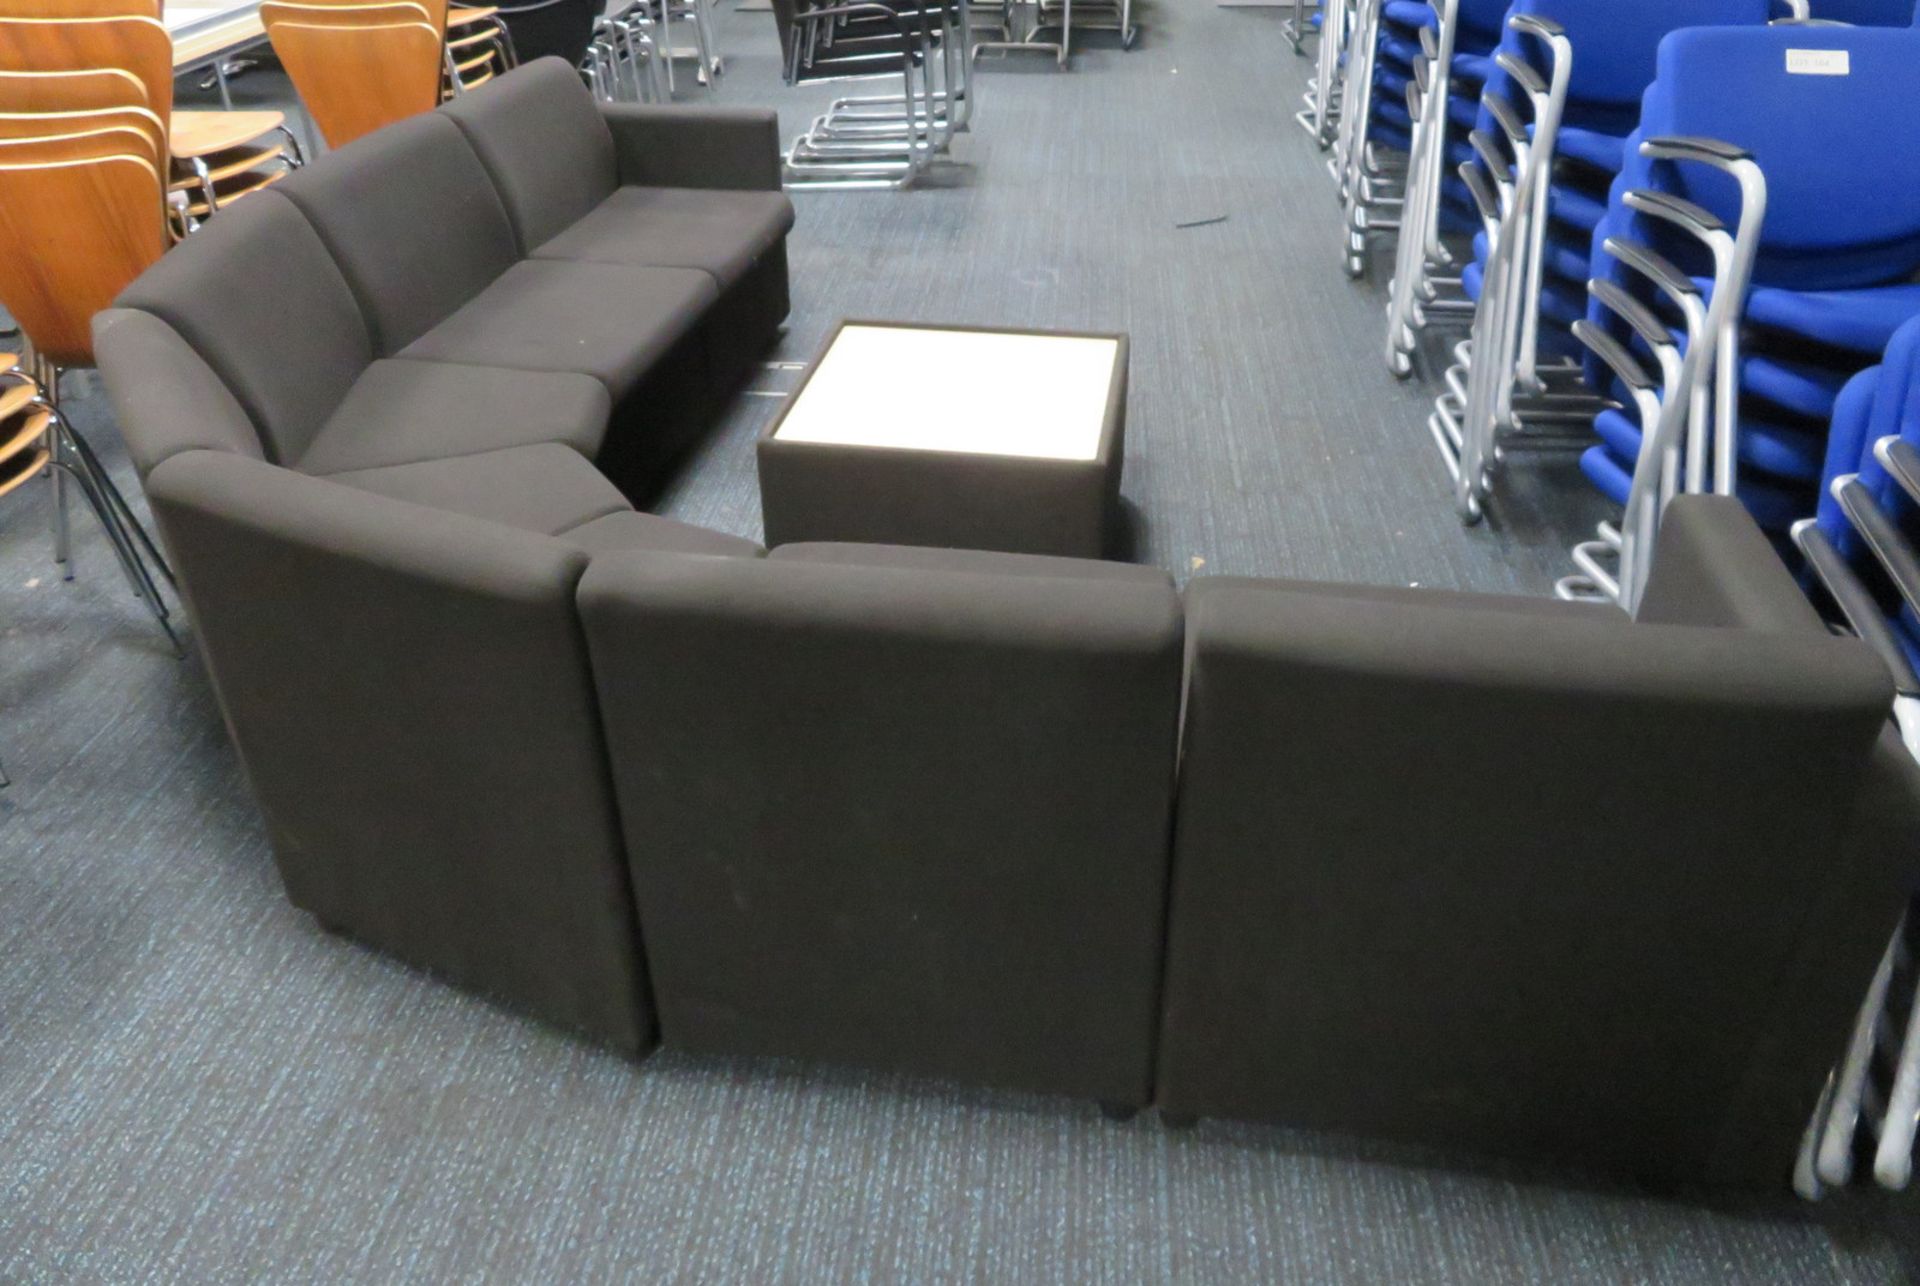 Waiting Room Corner Sofa With Coffee Table. Dimensions: 2000x2000mm (LxL) - Image 3 of 3